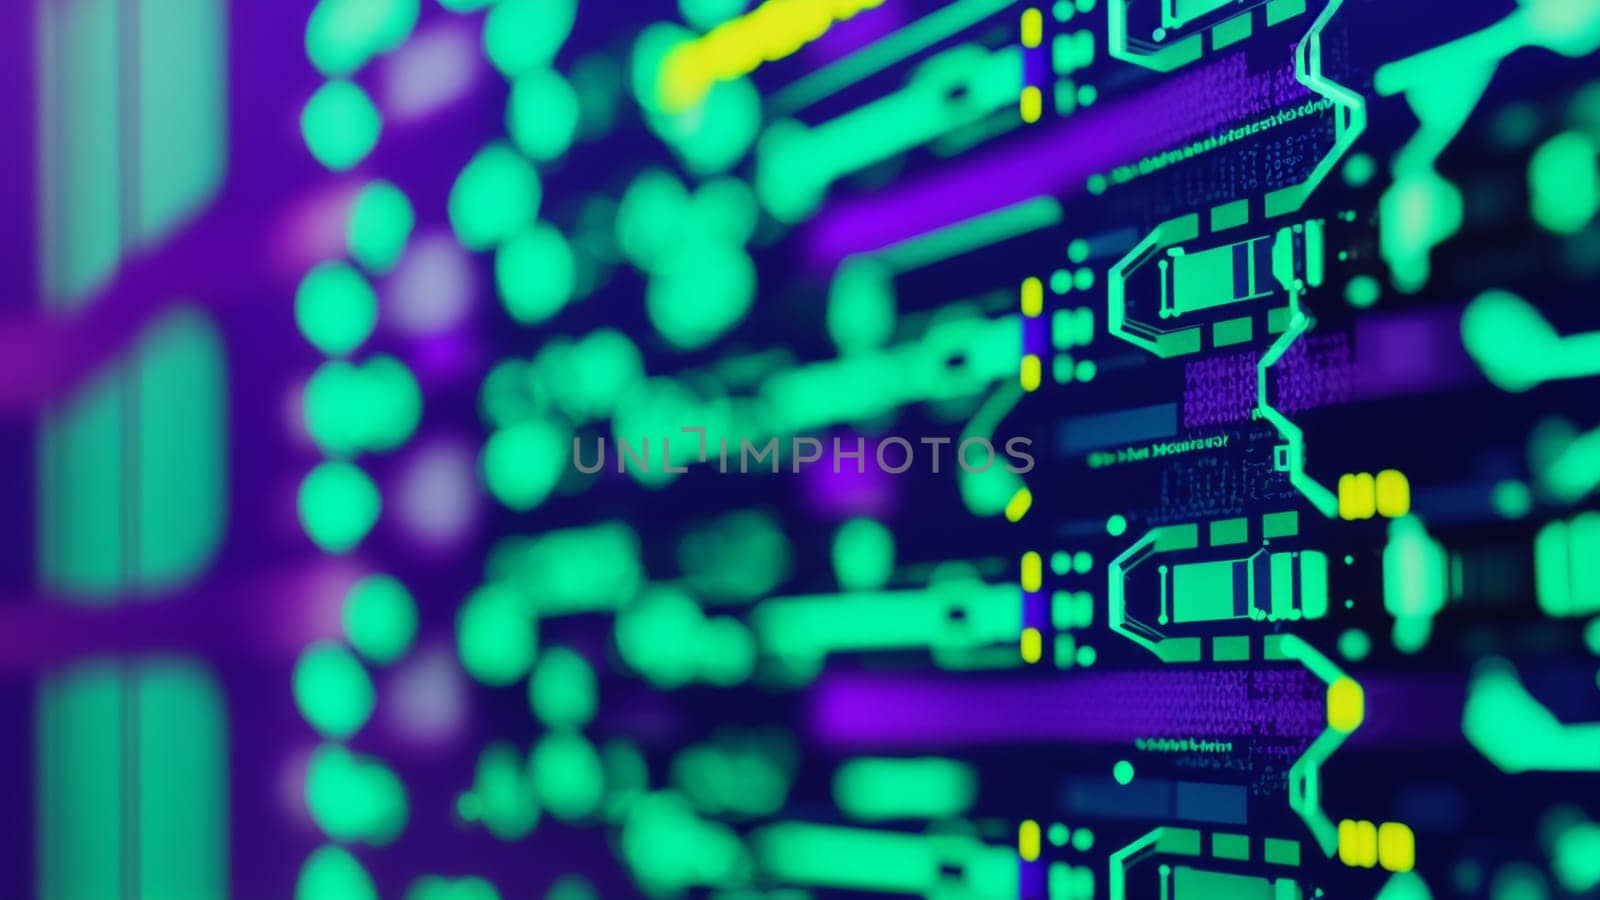 Illustration in concept of electronics and Internet and computer networks, cybersecurity, computer security, in the form of blue and green colorful printed circuit. by XabiDonostia